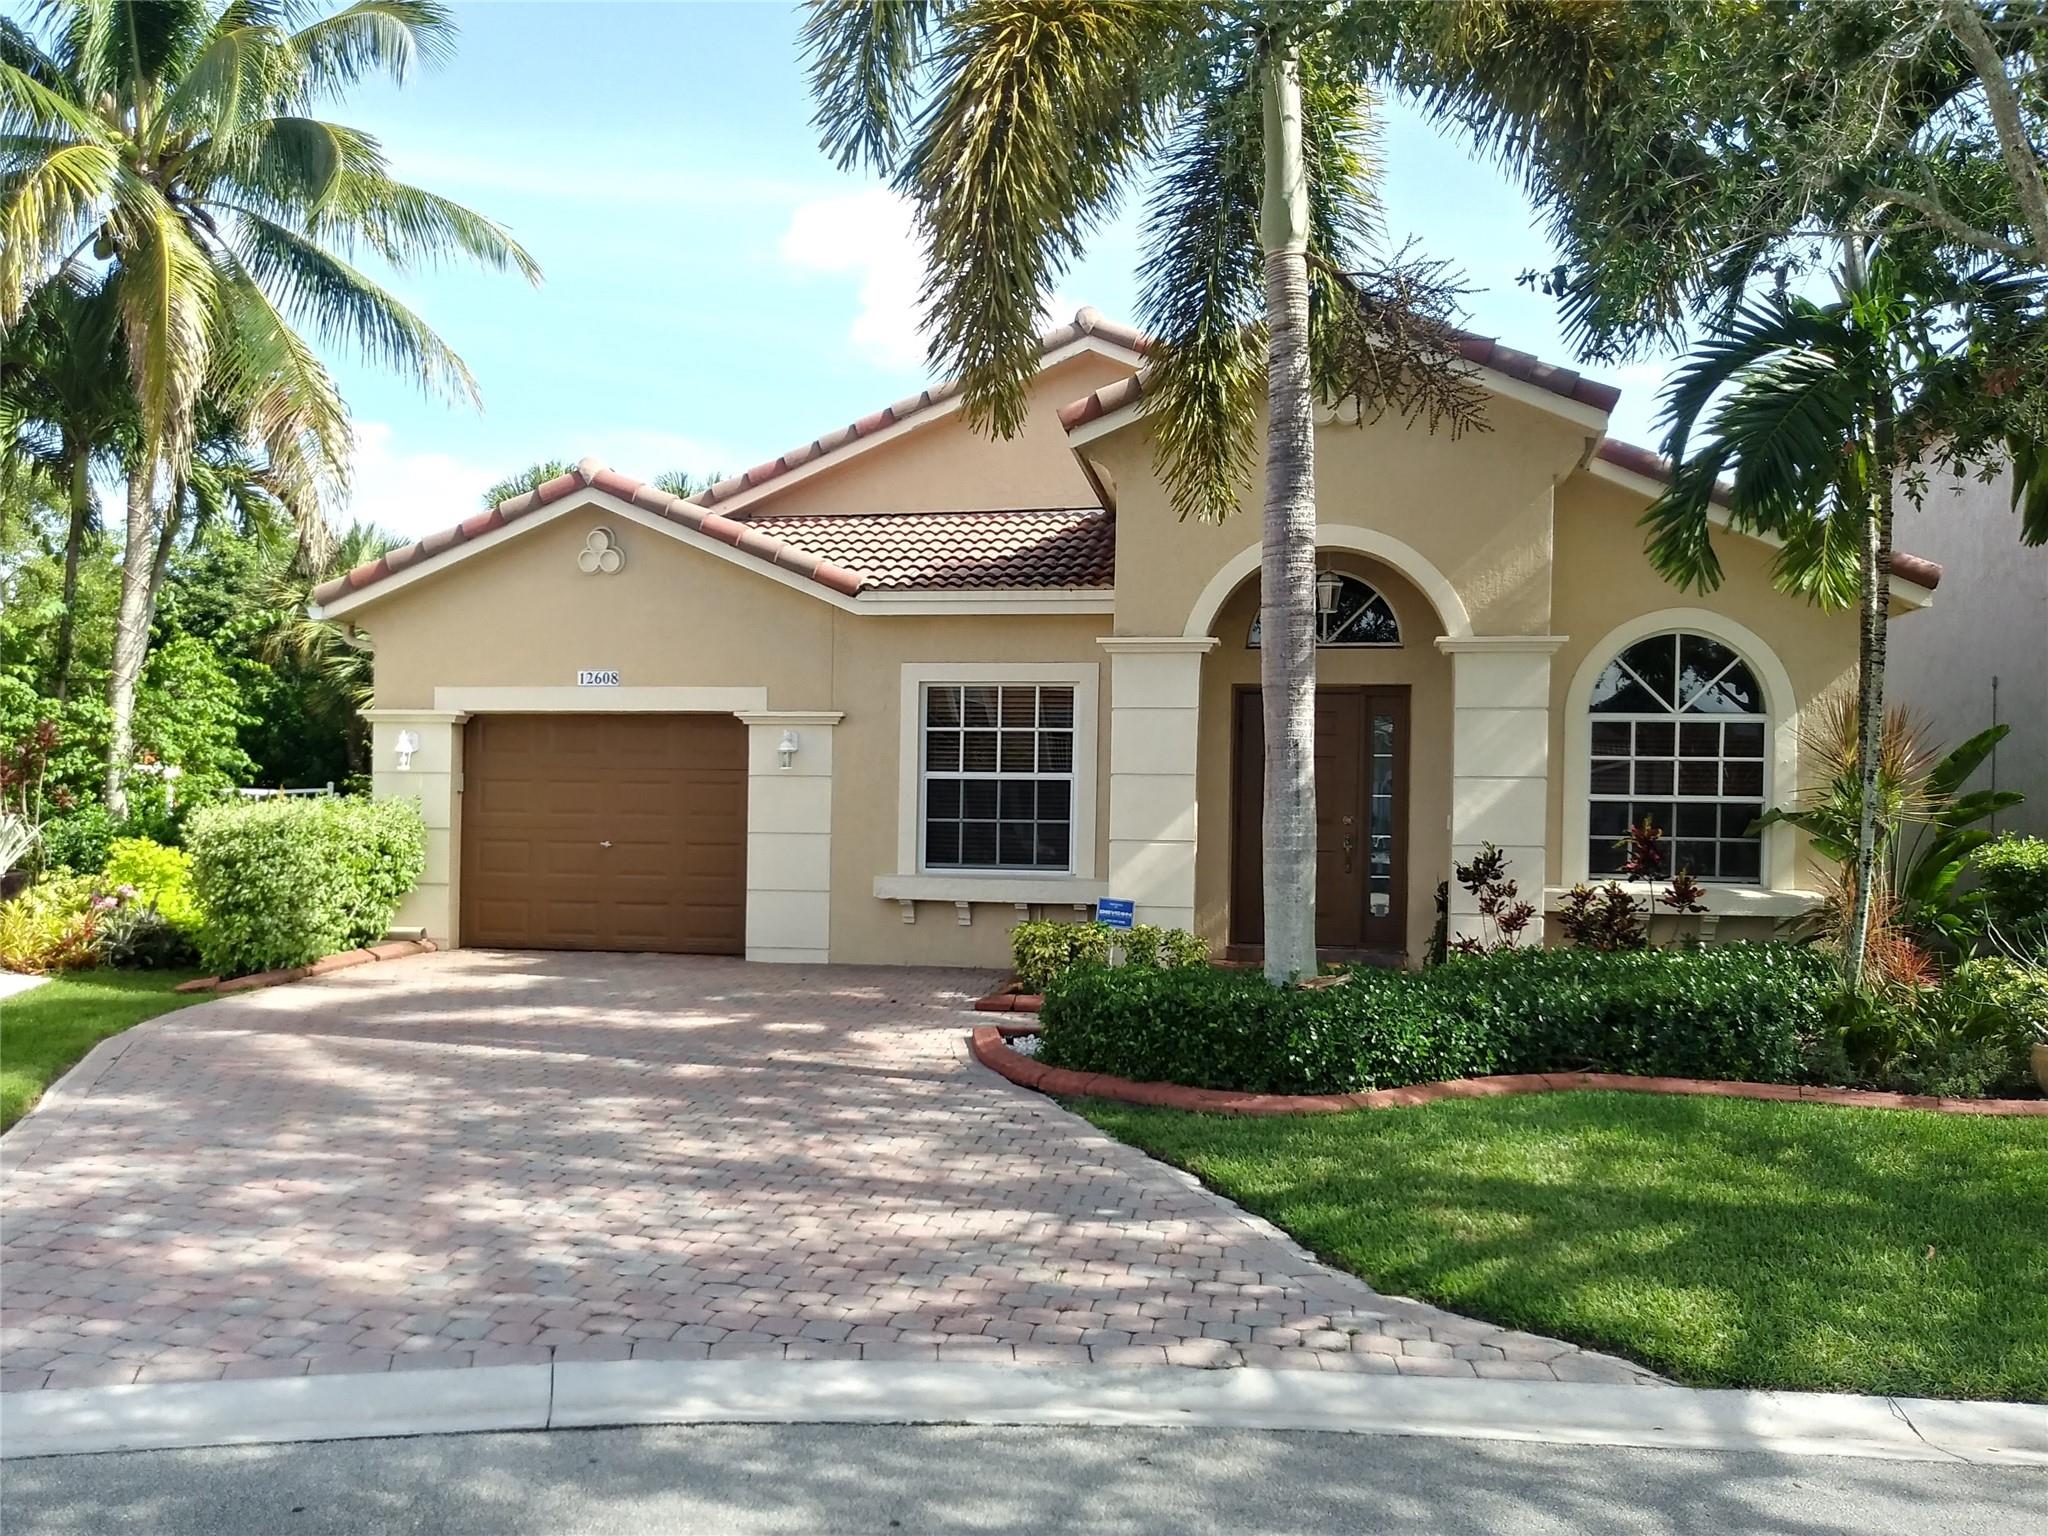 12608 NW 6TH St, Coral Springs, FL 